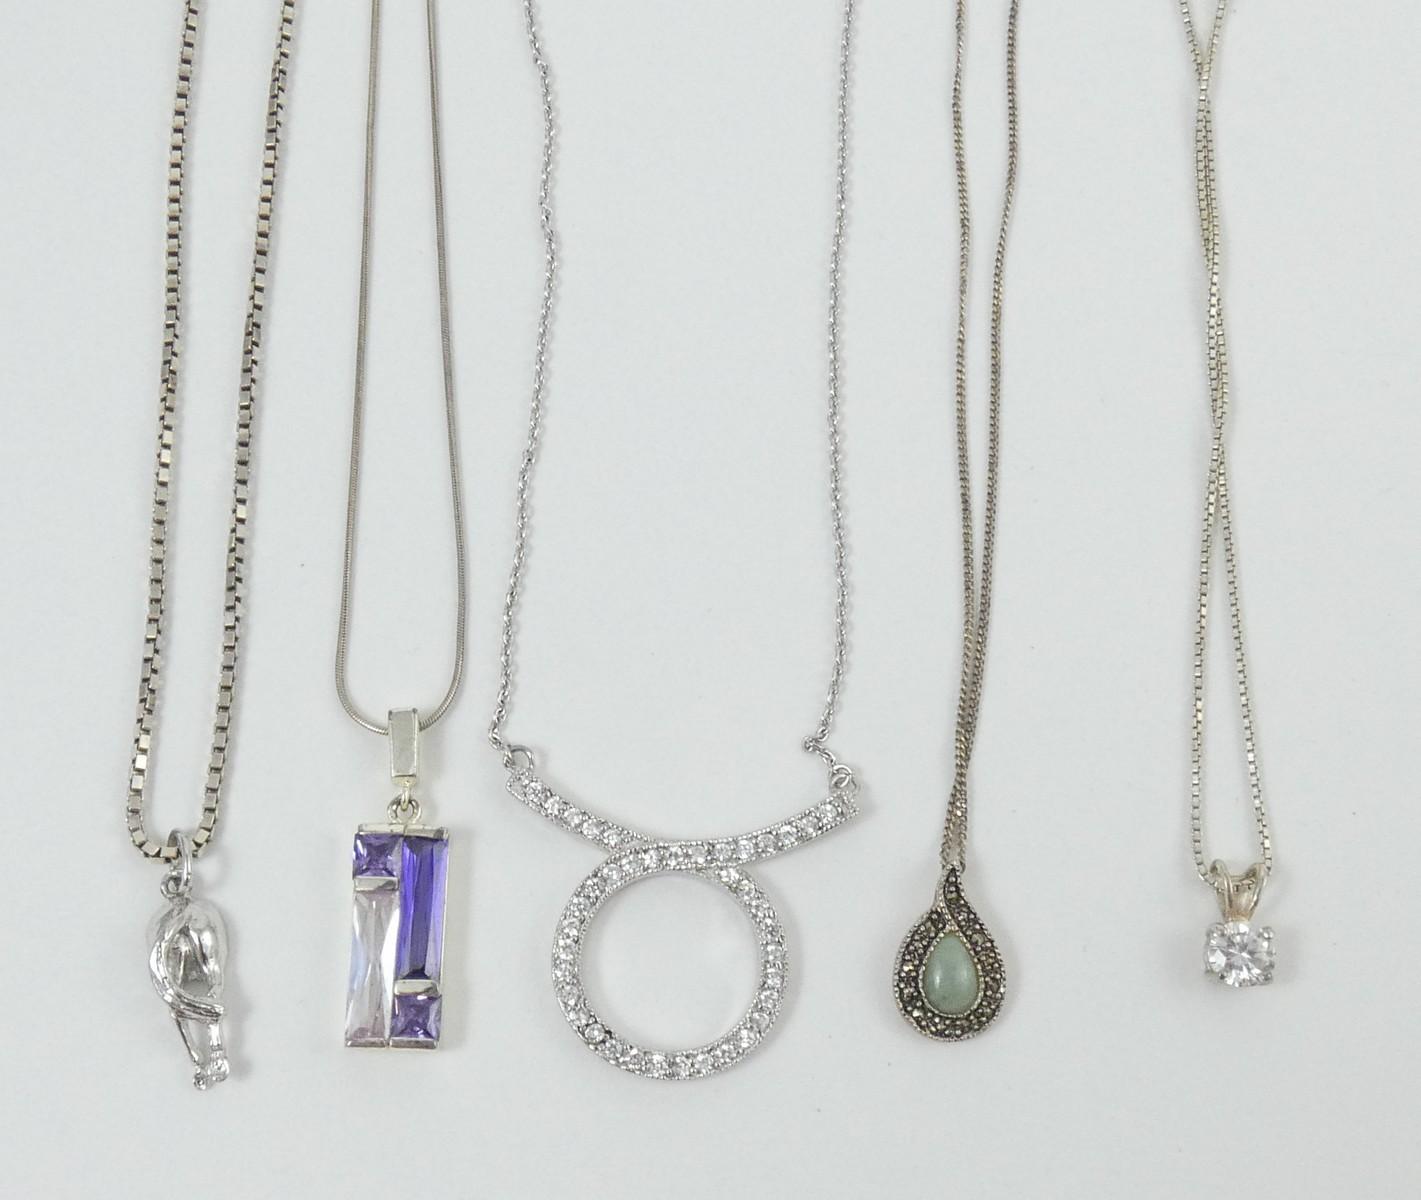 5 STERLING PENDANT NECKLACES